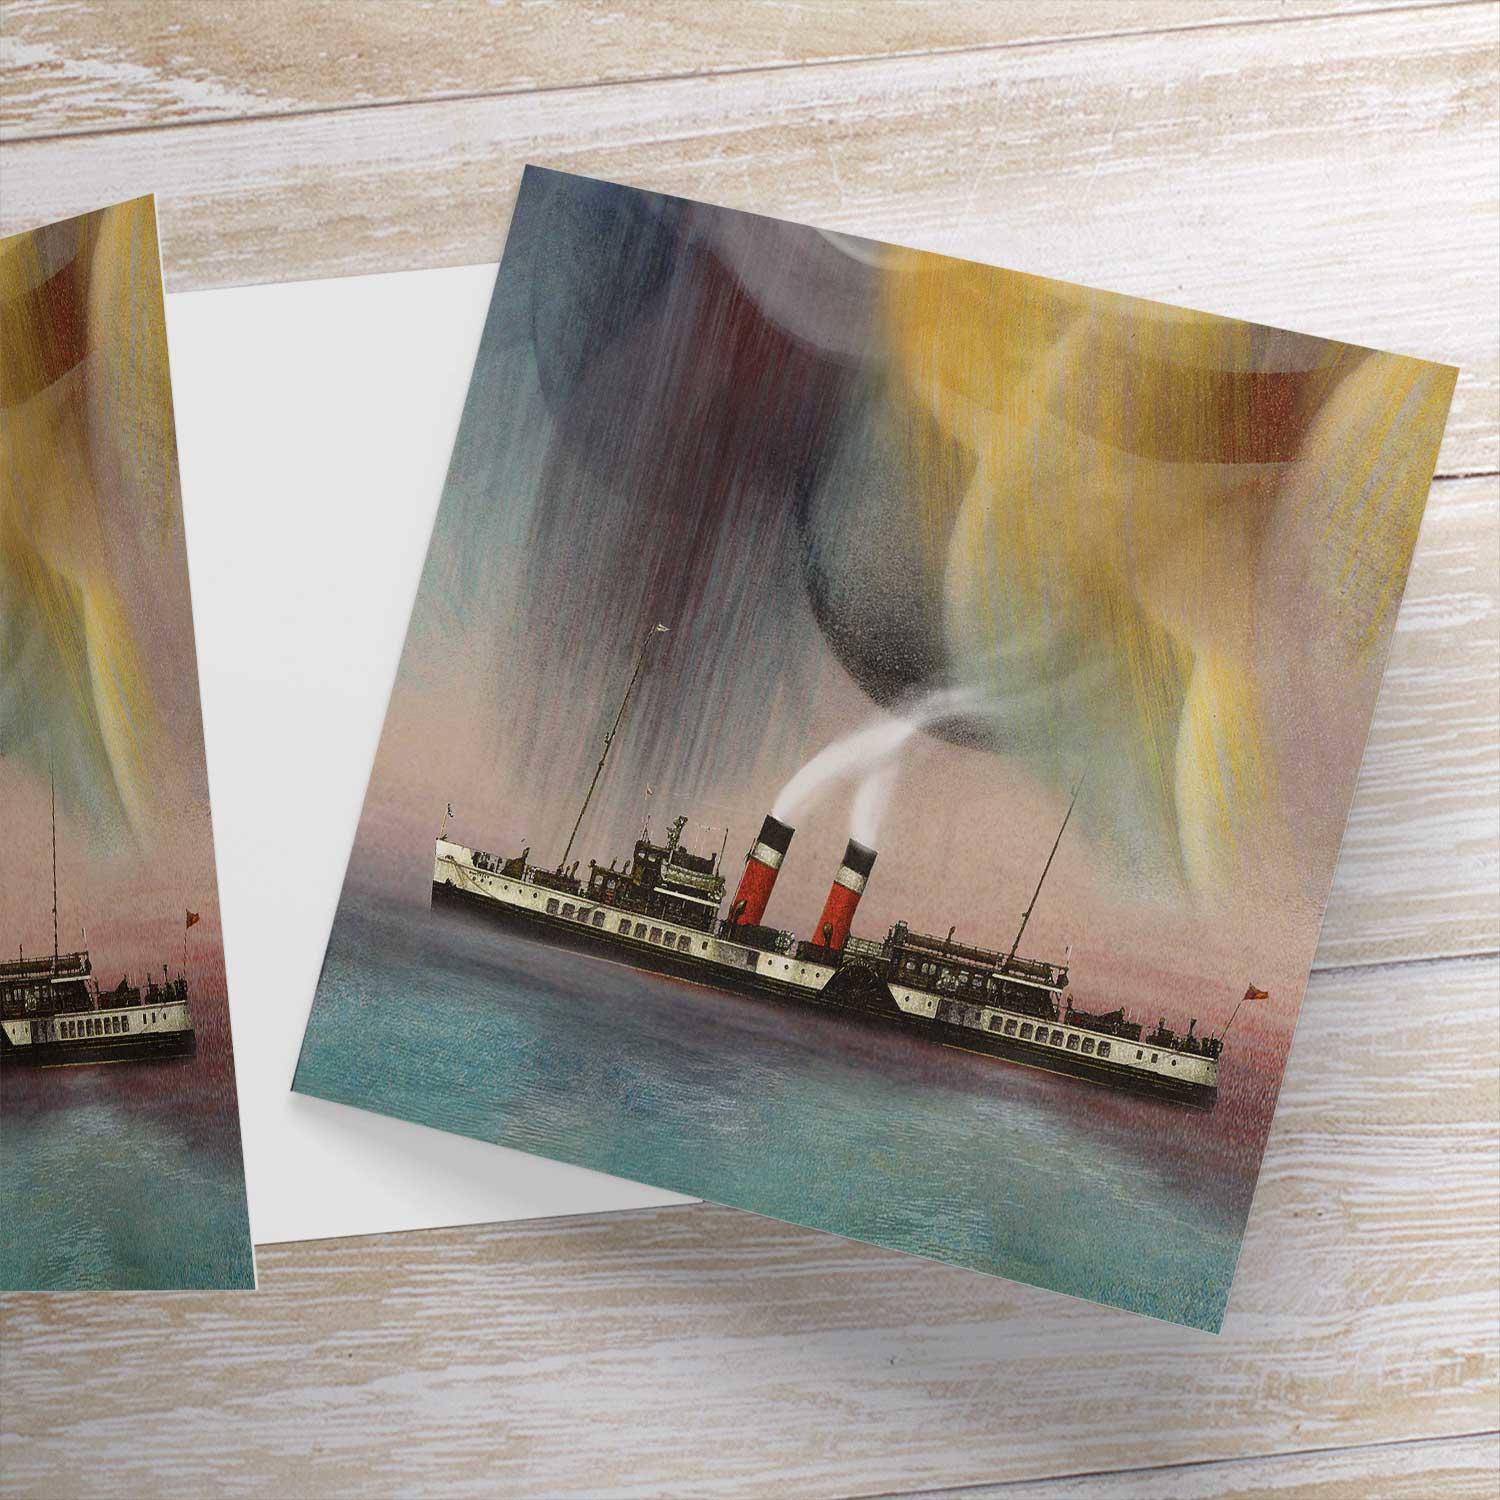 PS Waverley, A & J Inglis, Glasgow Greeting Card from an original painting by artist Esther Cohen